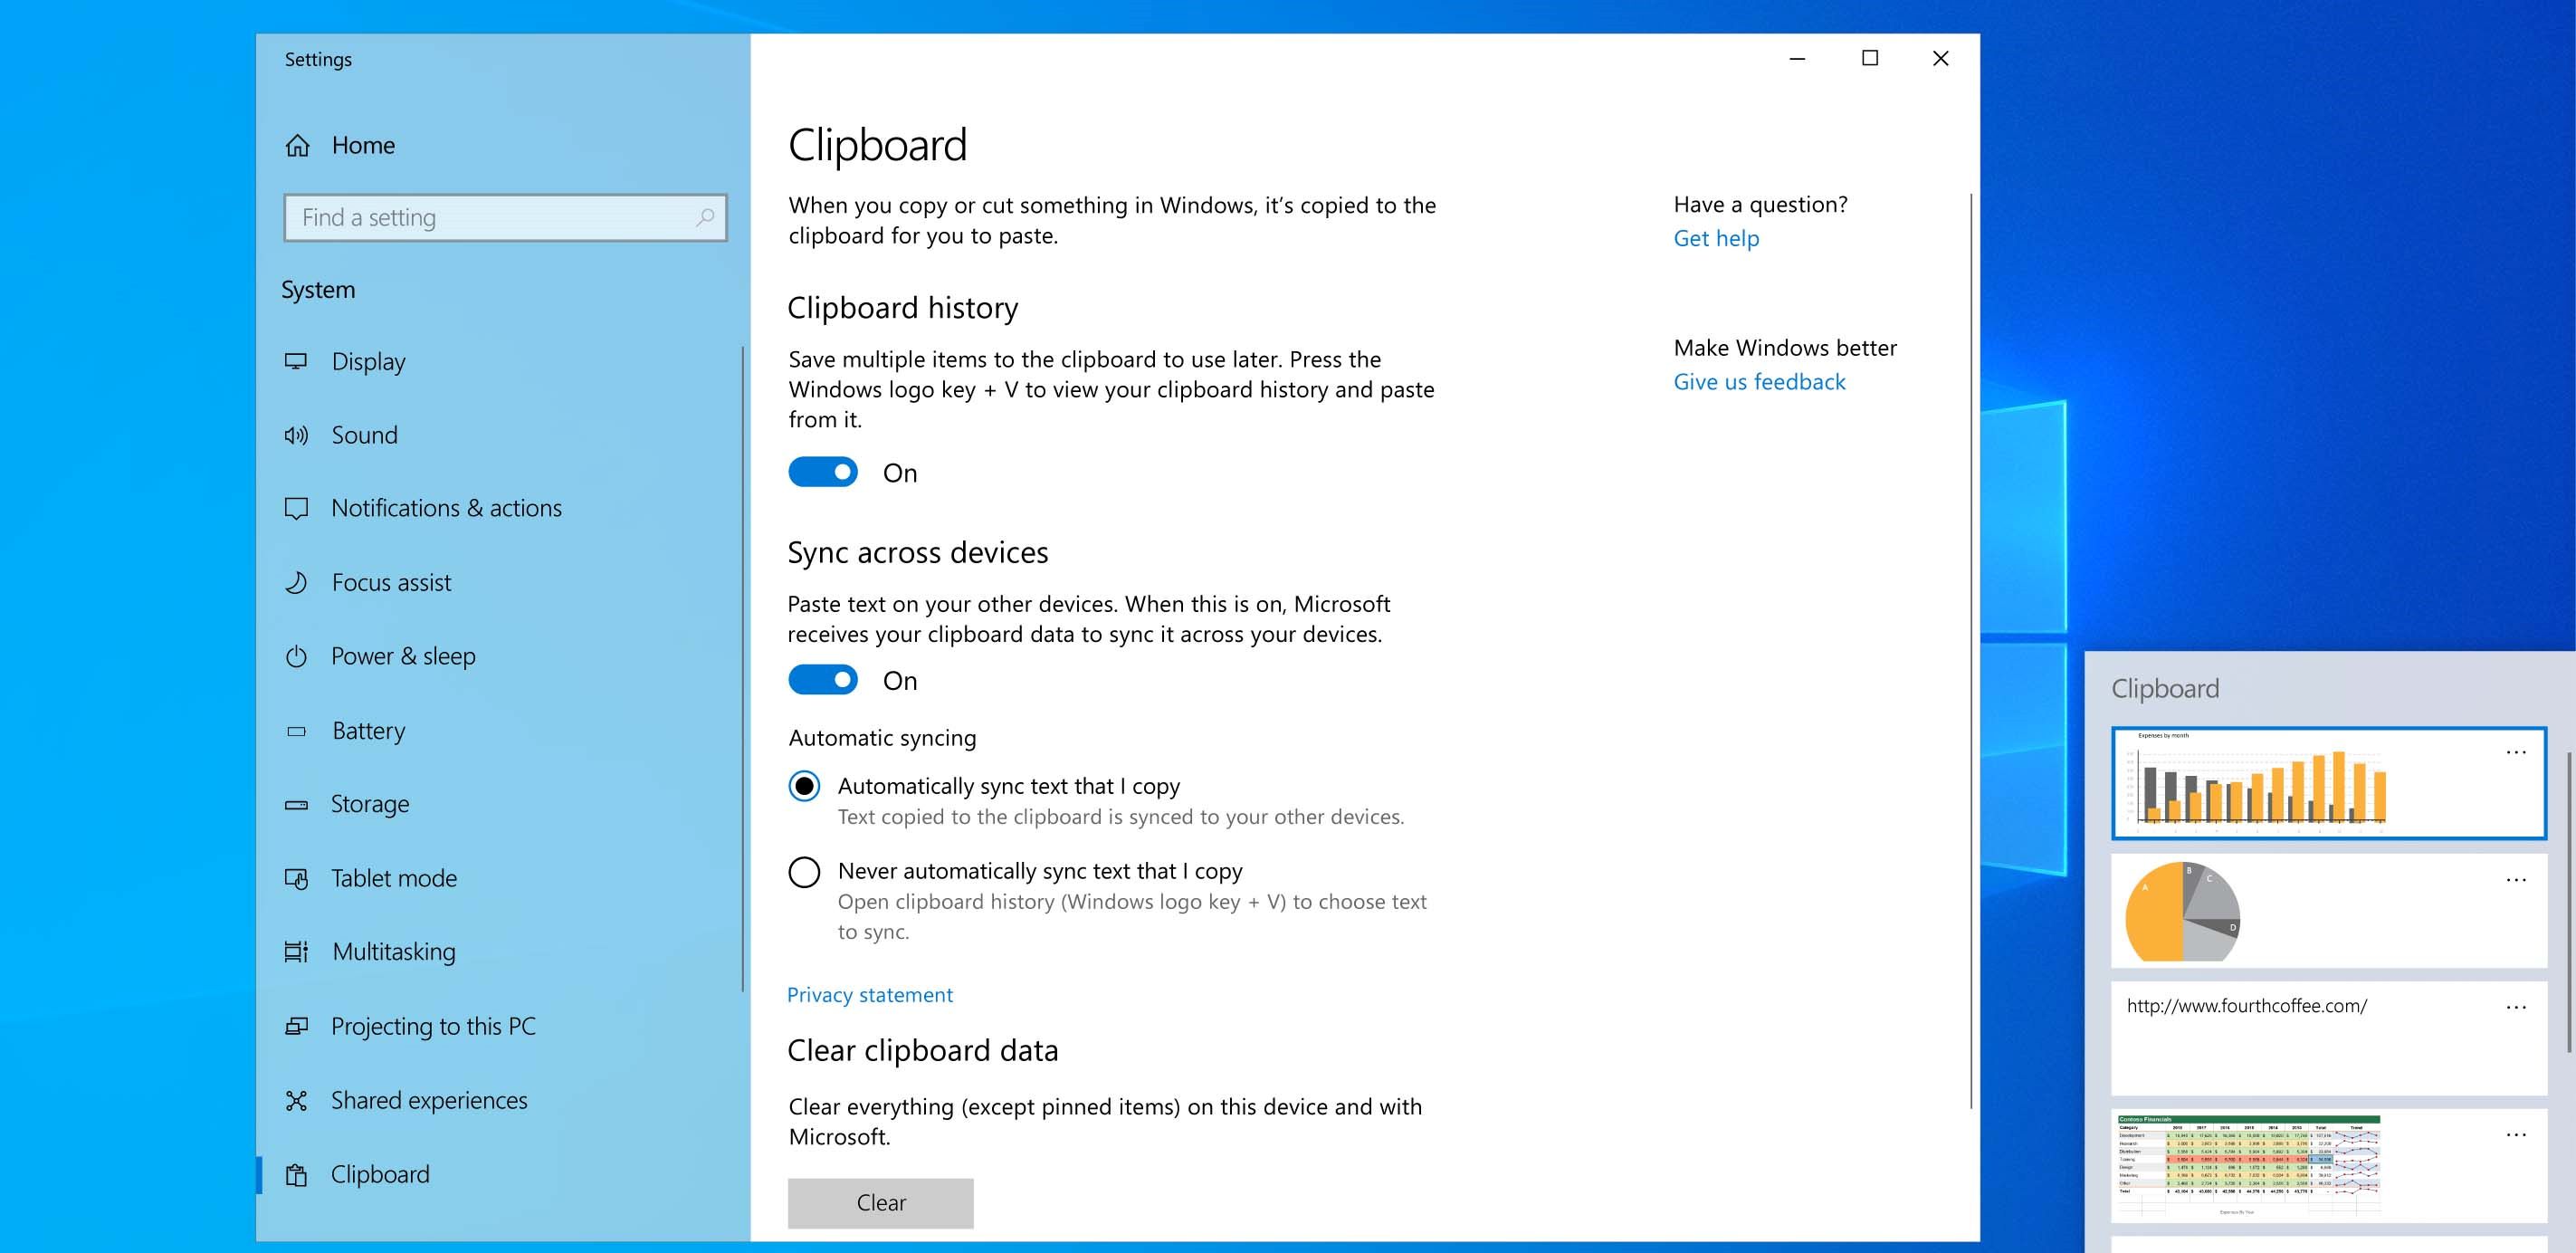 How To Open Clipboard In Windows 10